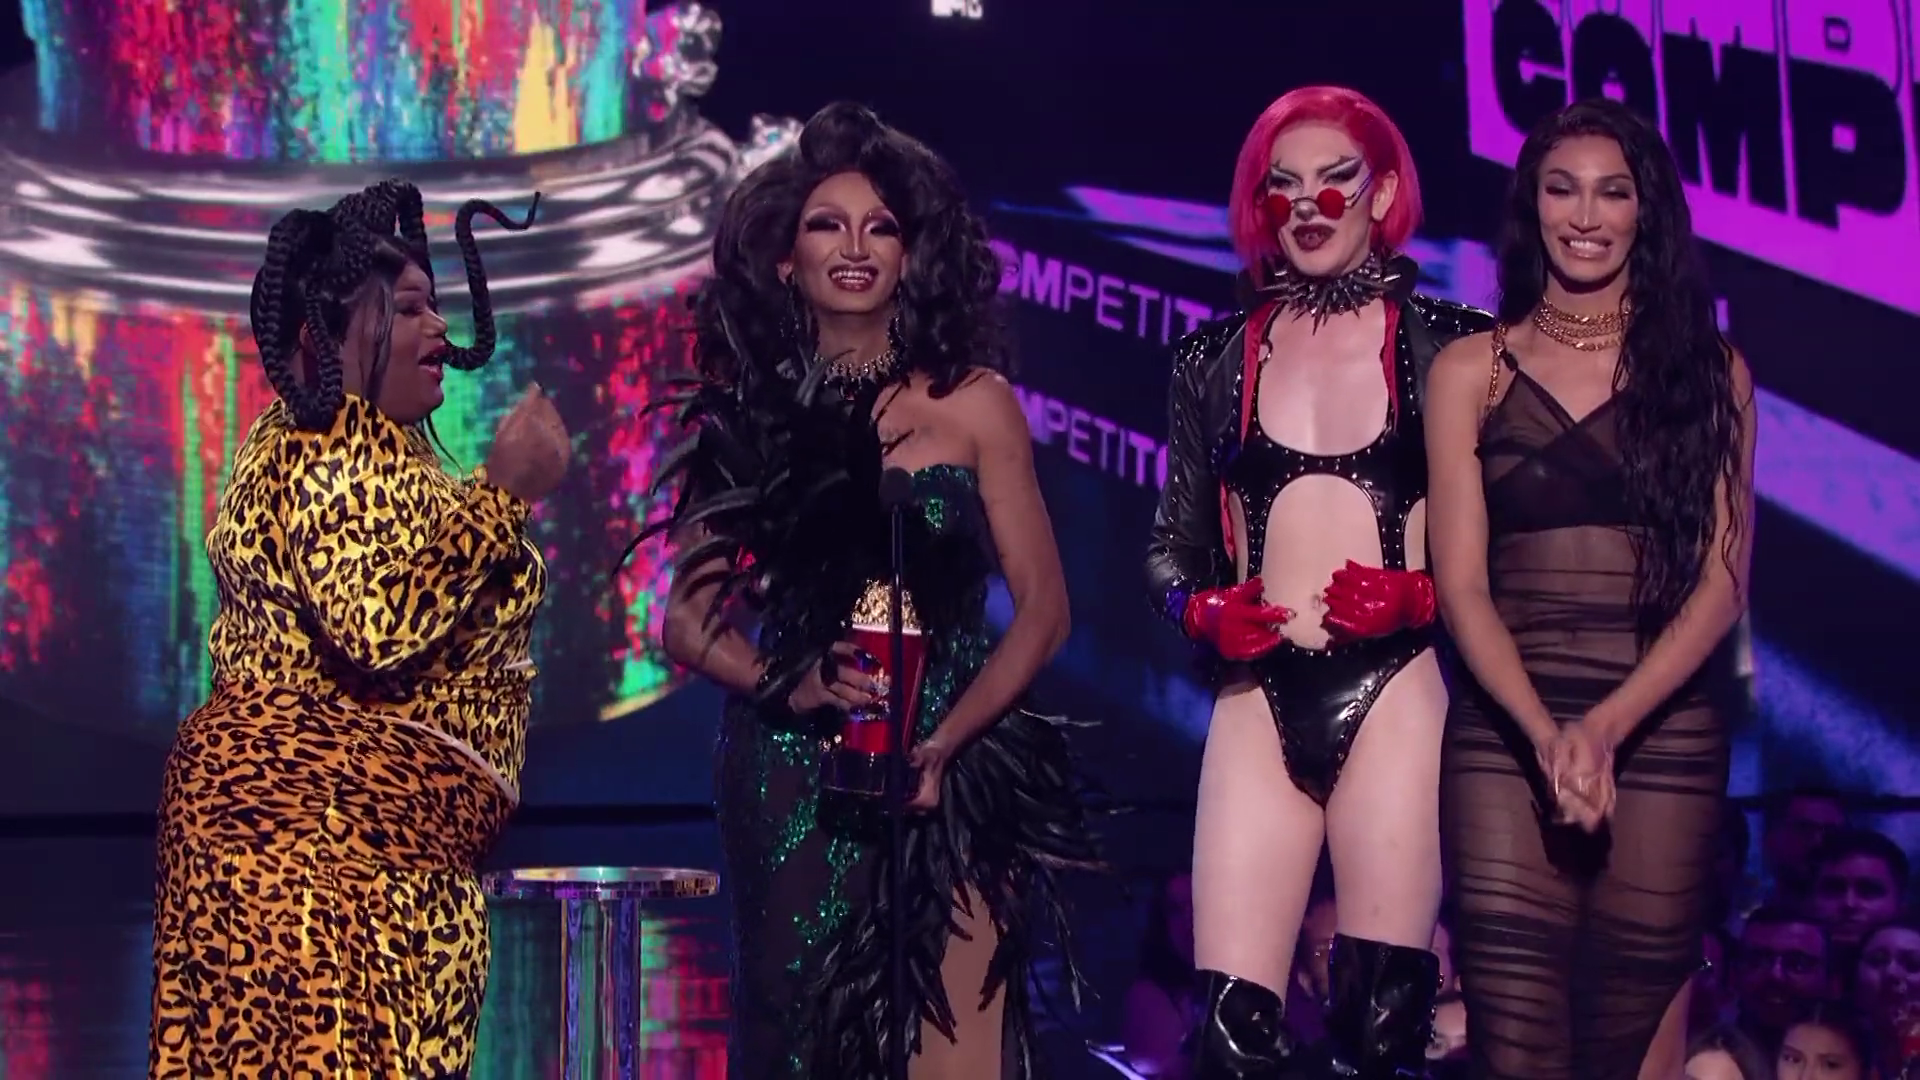 The cast of RuPaul's Drag Race accepts the award for Best Competition Series.